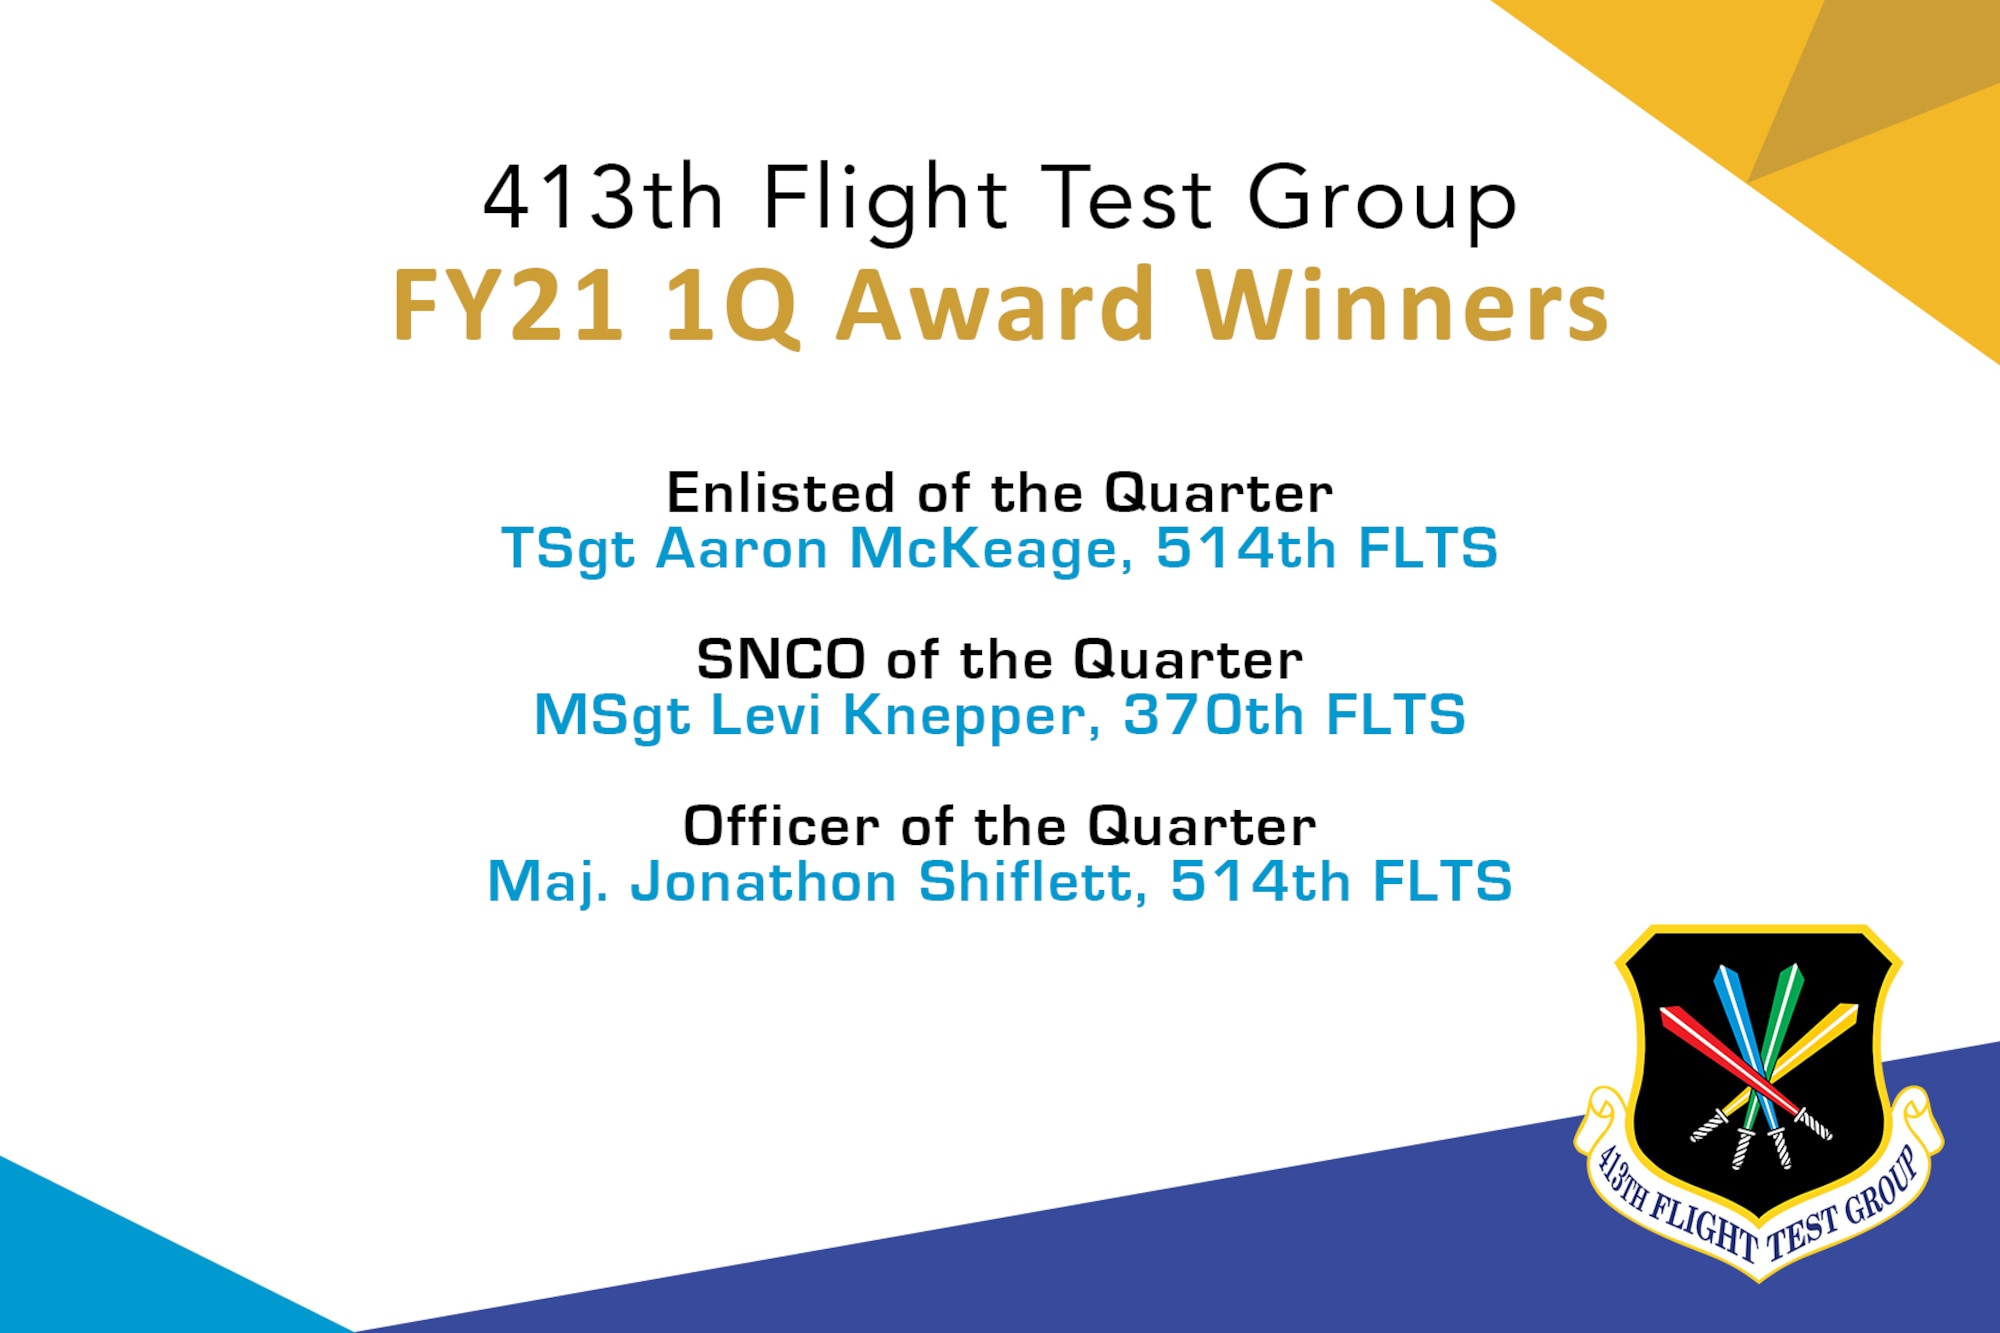 Congratulations to the 413th Flight Test Group's 1st quarter award winners for fiscal year 2021.